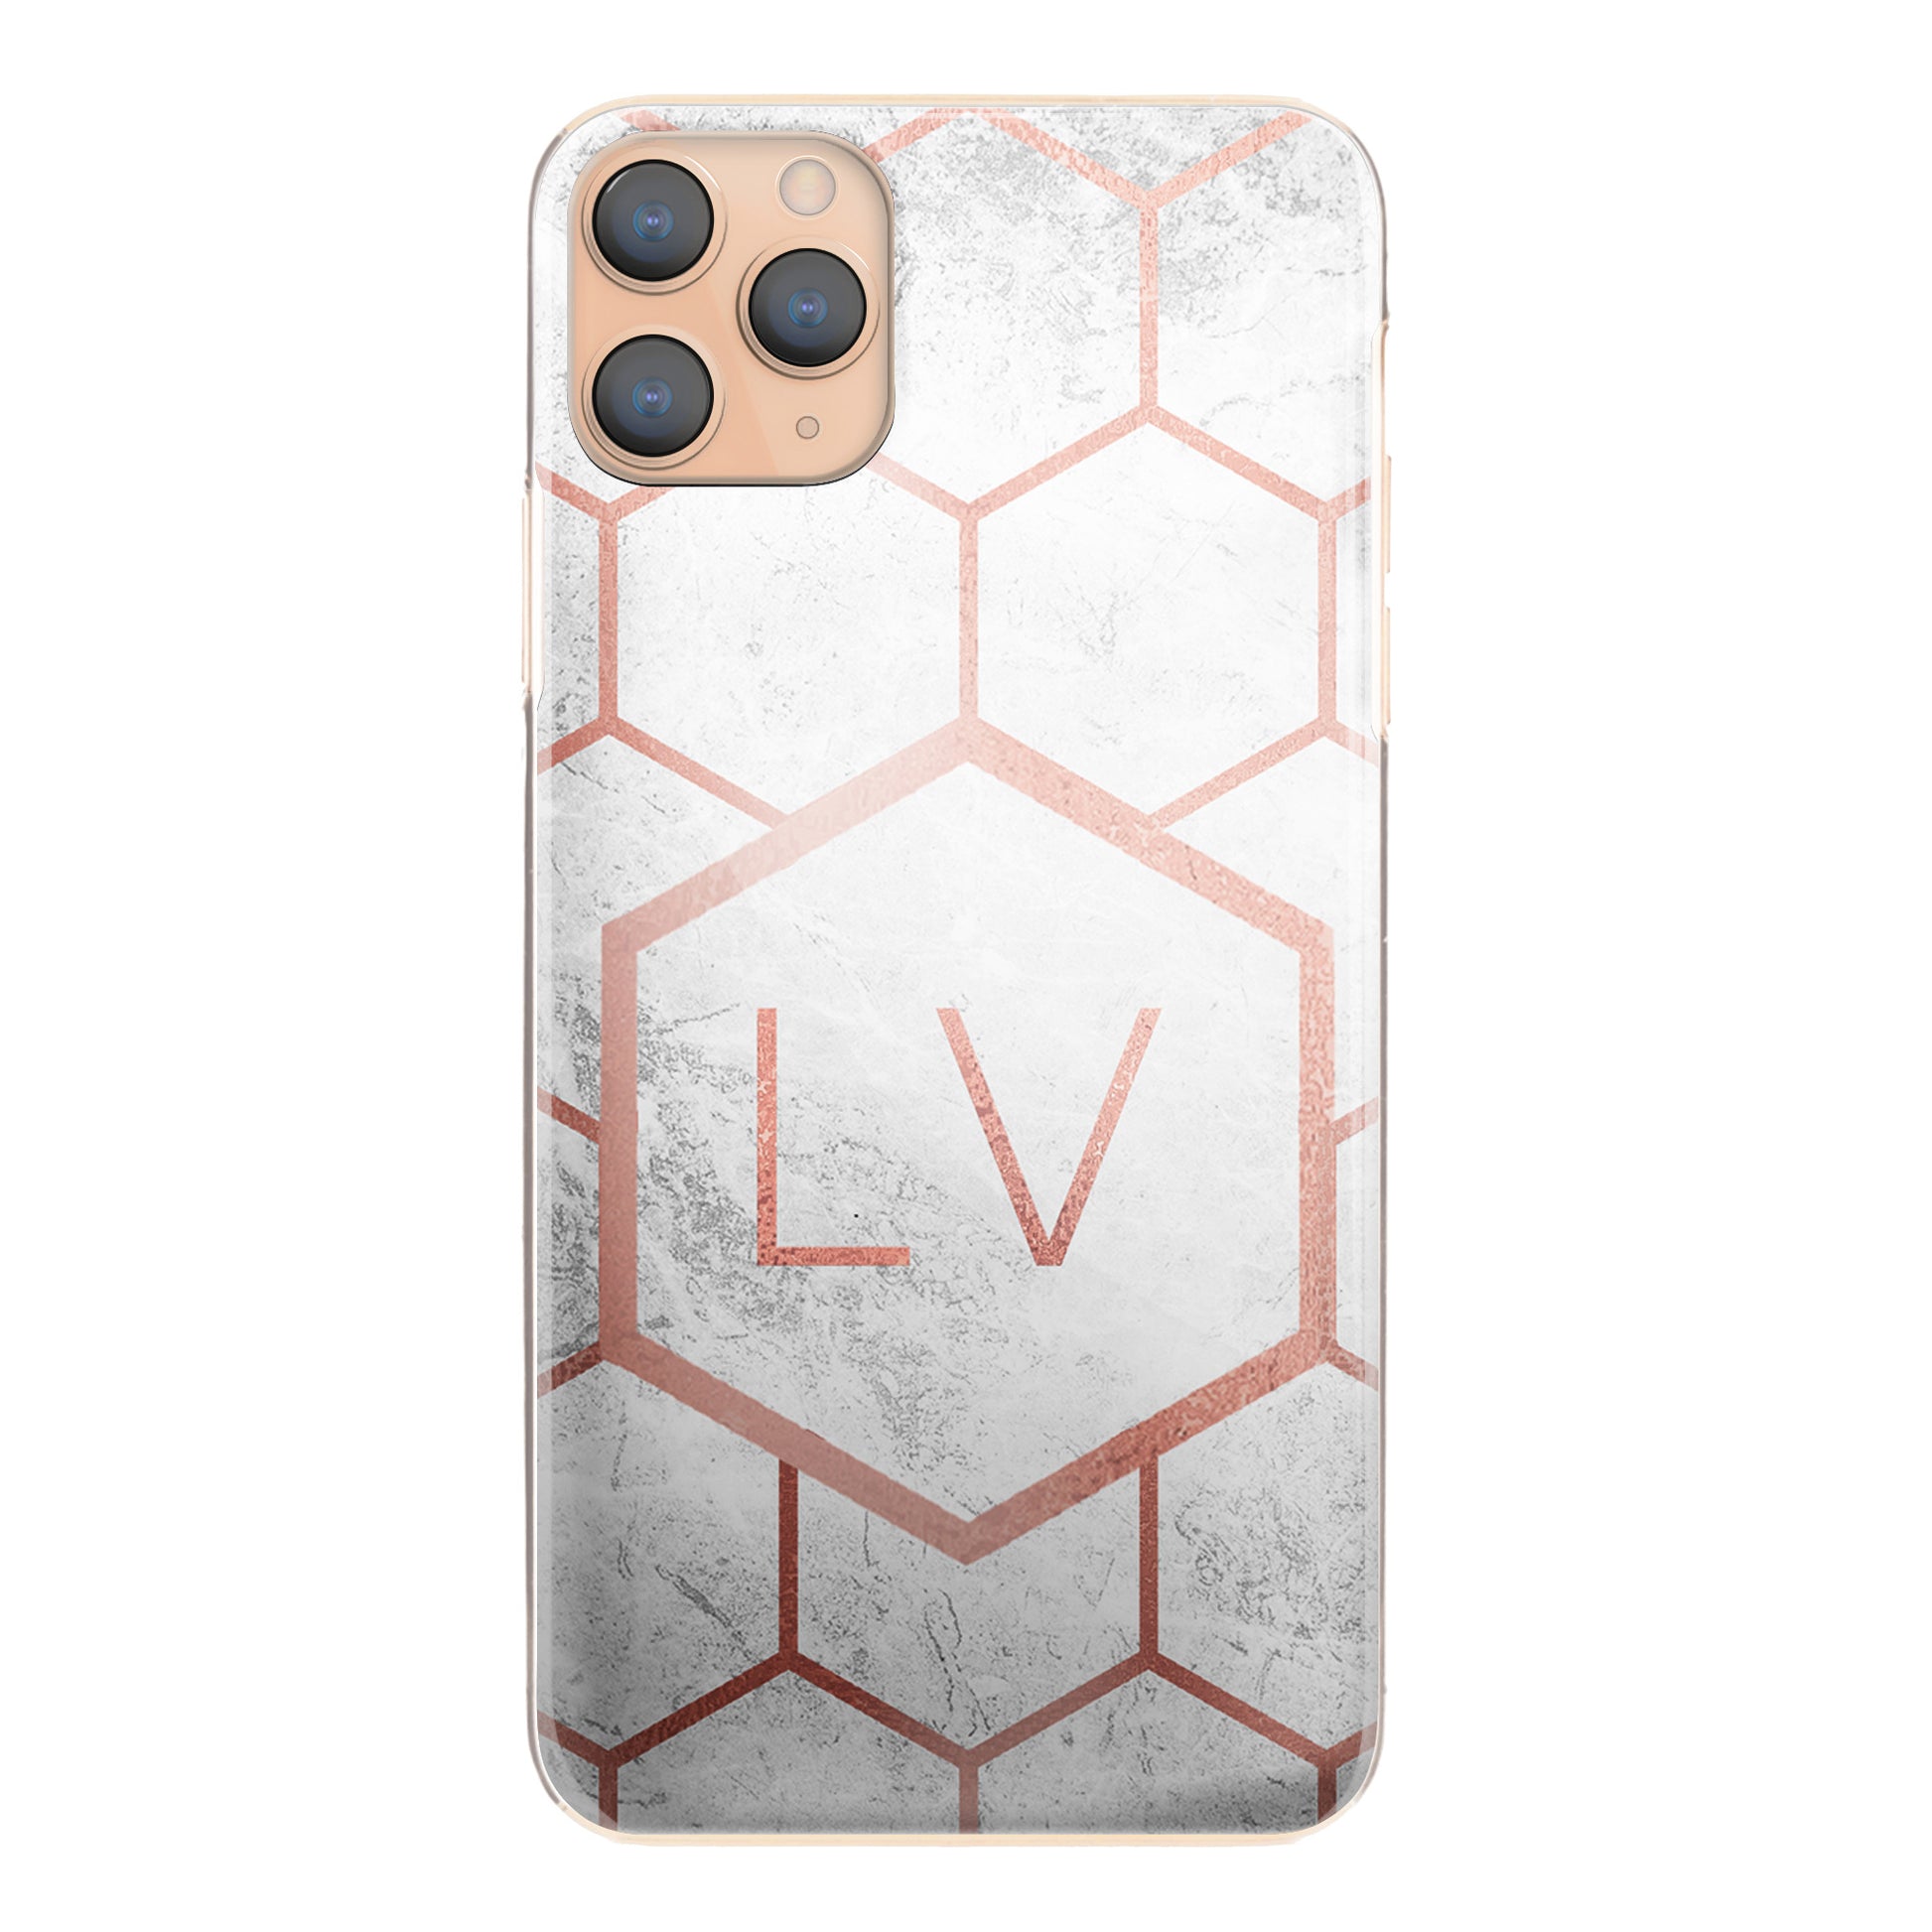 Personalised Xiaomi Phone Hard Case with Pink Initials and Honeycomb Pattern on Grey Marble